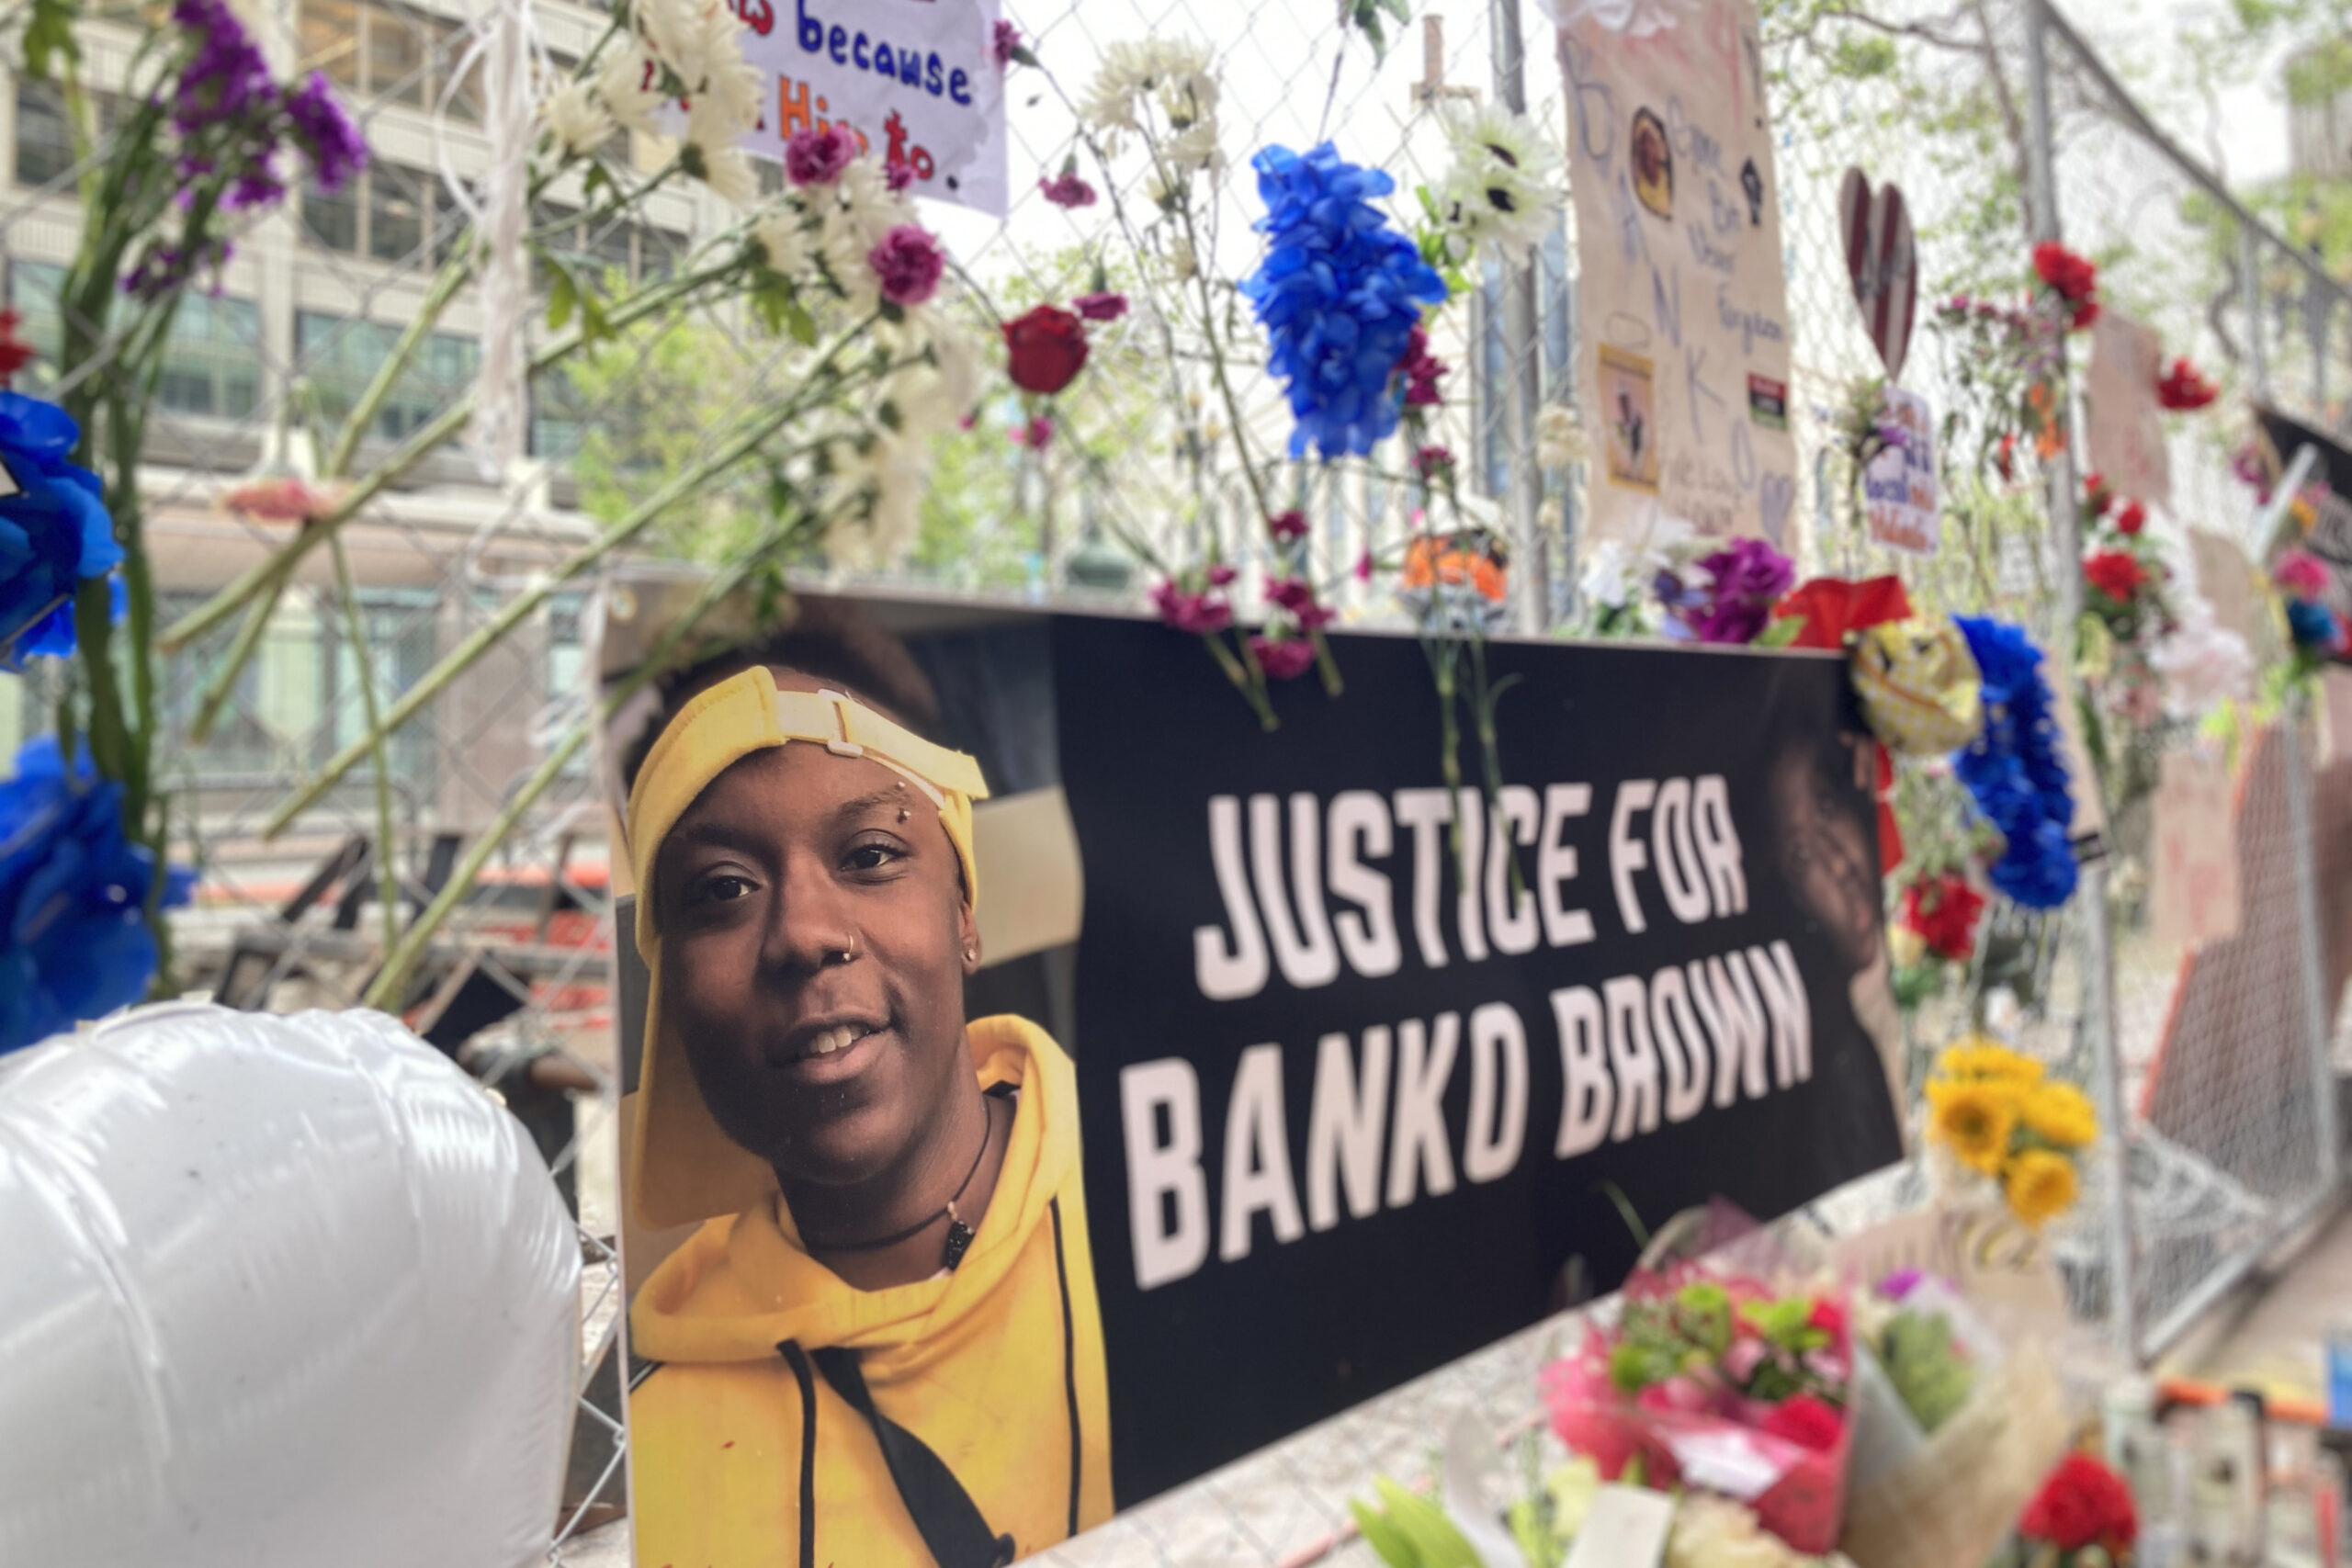 Exclusive: Security Guard Who Killed Banko Brown at SF Walgreens Speaks Out